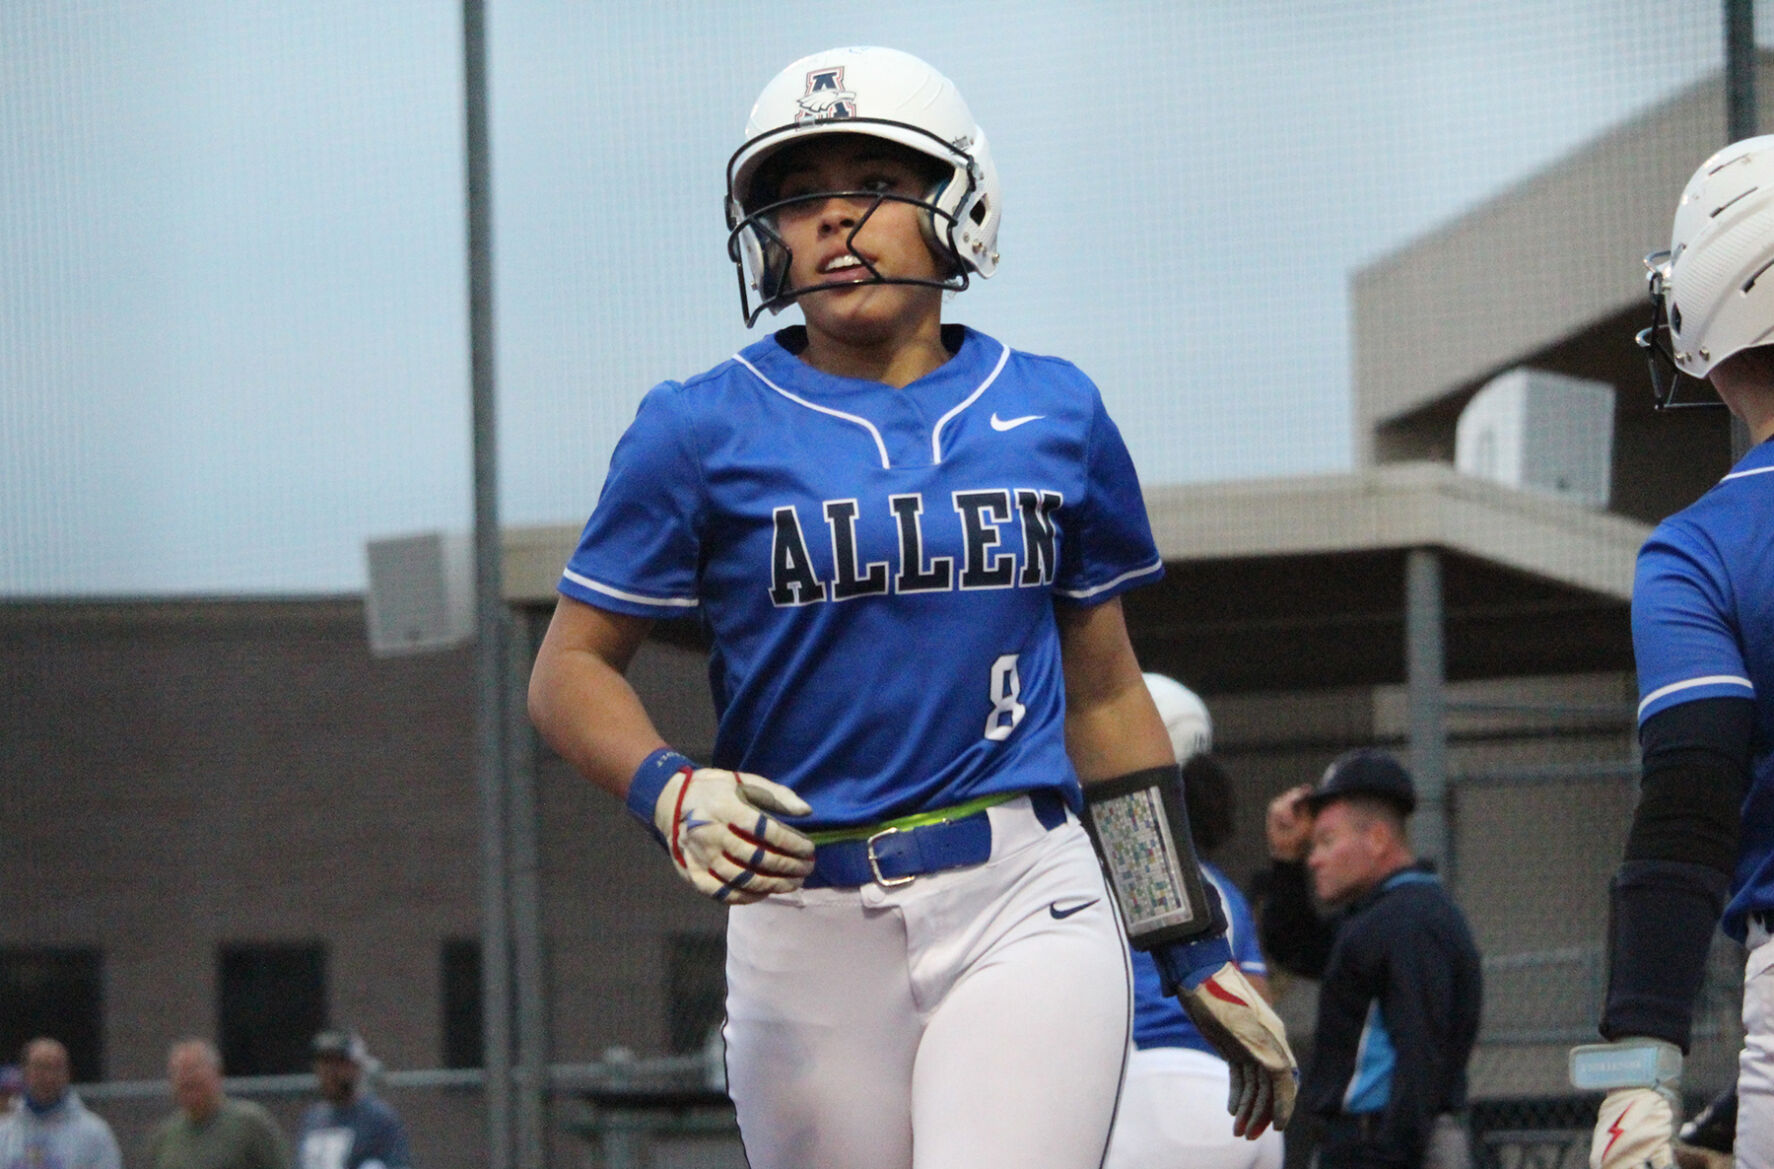 Allen Softball Clinches No. 2 Seed After Win; Prosper, Lovejoy Baseball Score Big Victories